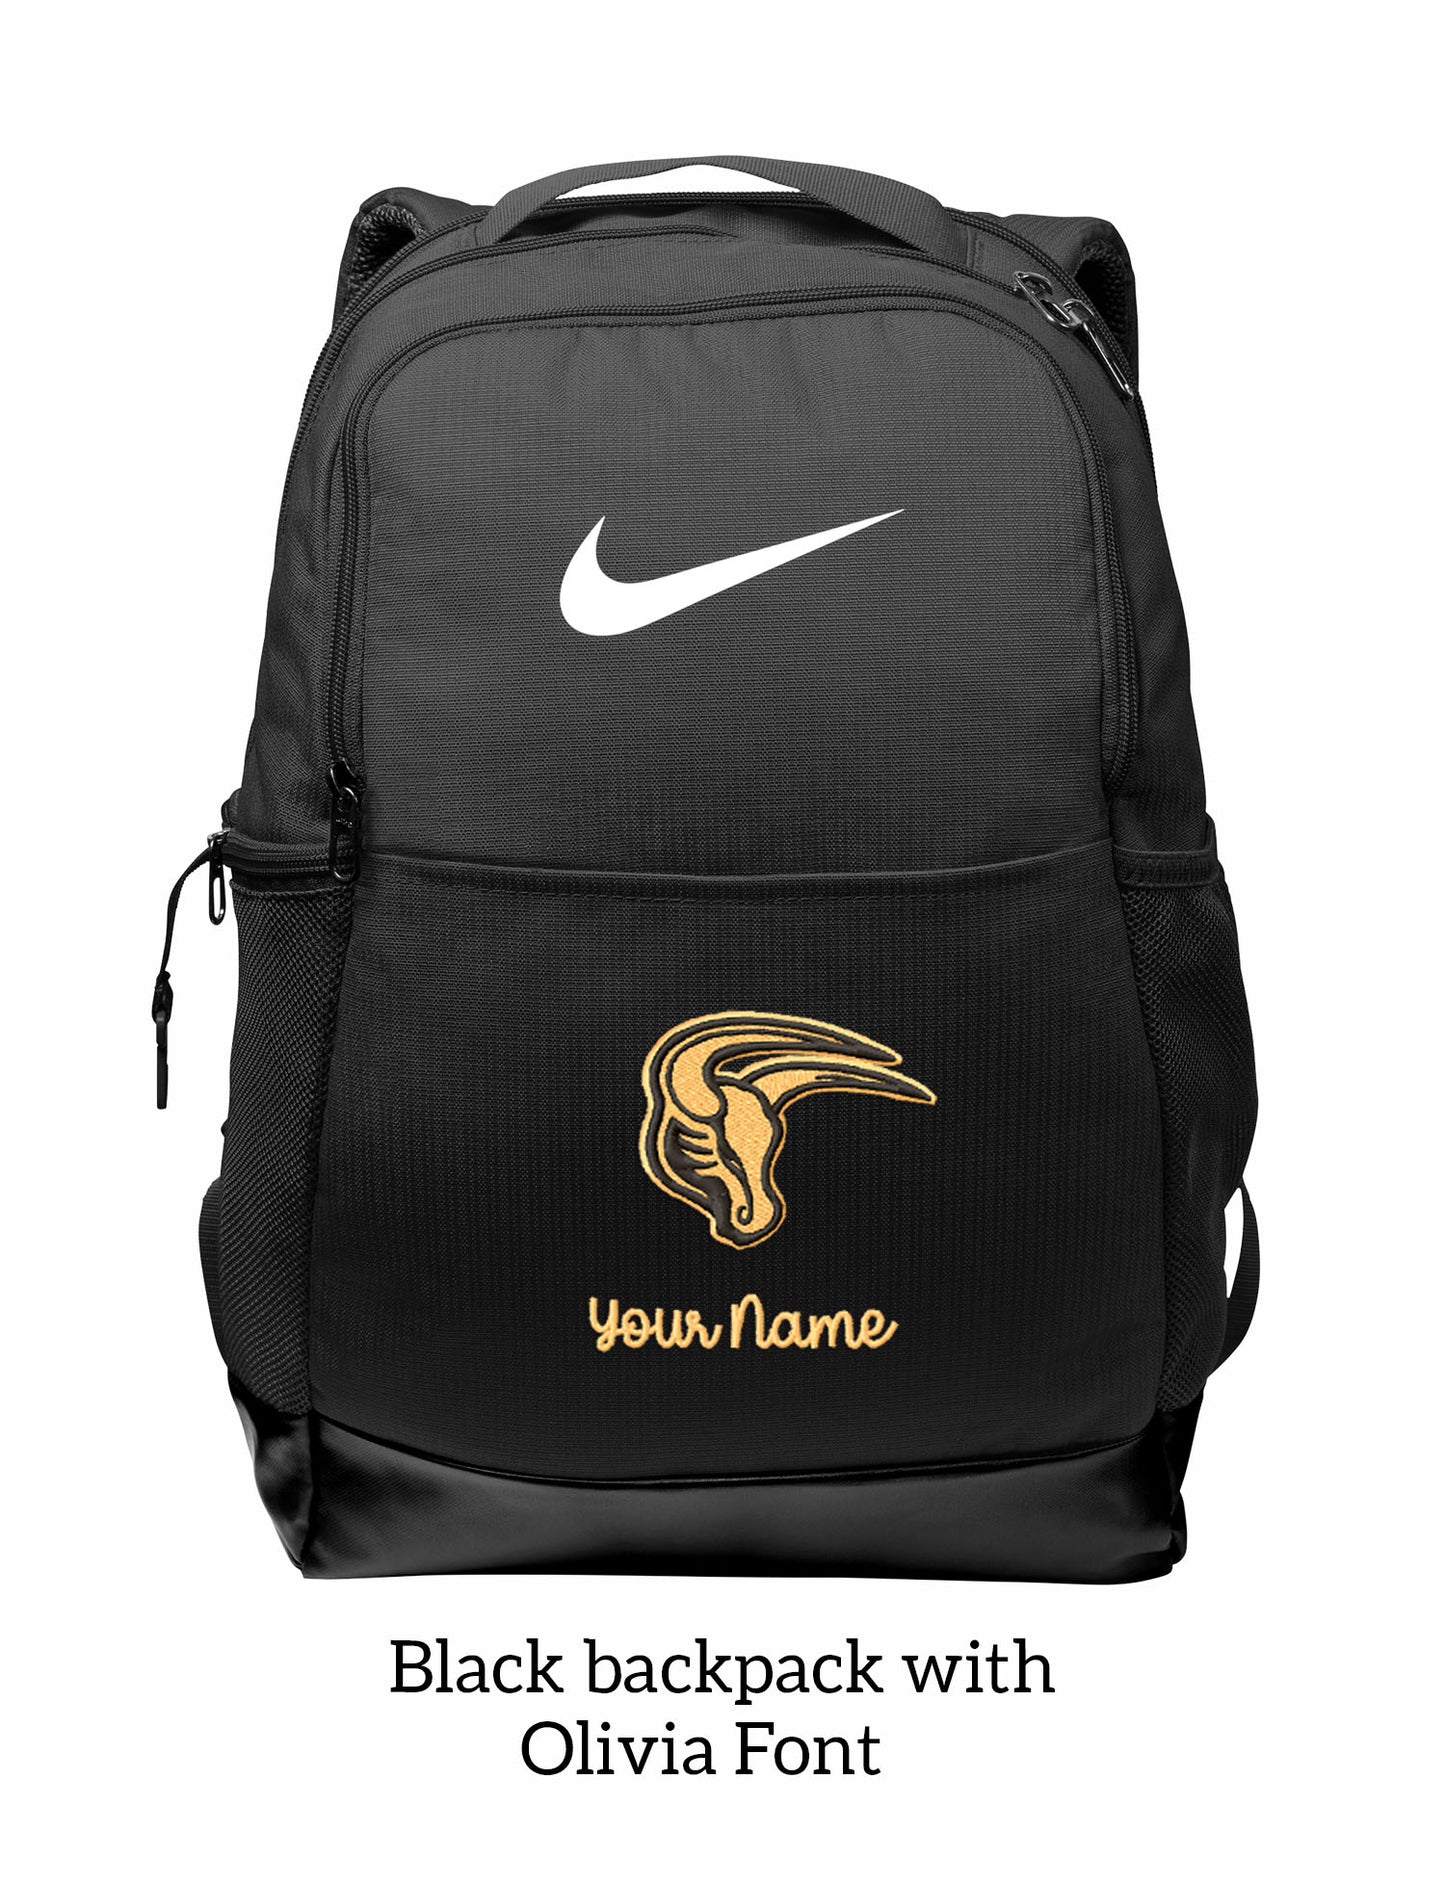 MSIS PTO-Maverick Nike Brasilia Backpack with Embroidery Design, Personalize with your Name! (Black or Grey)